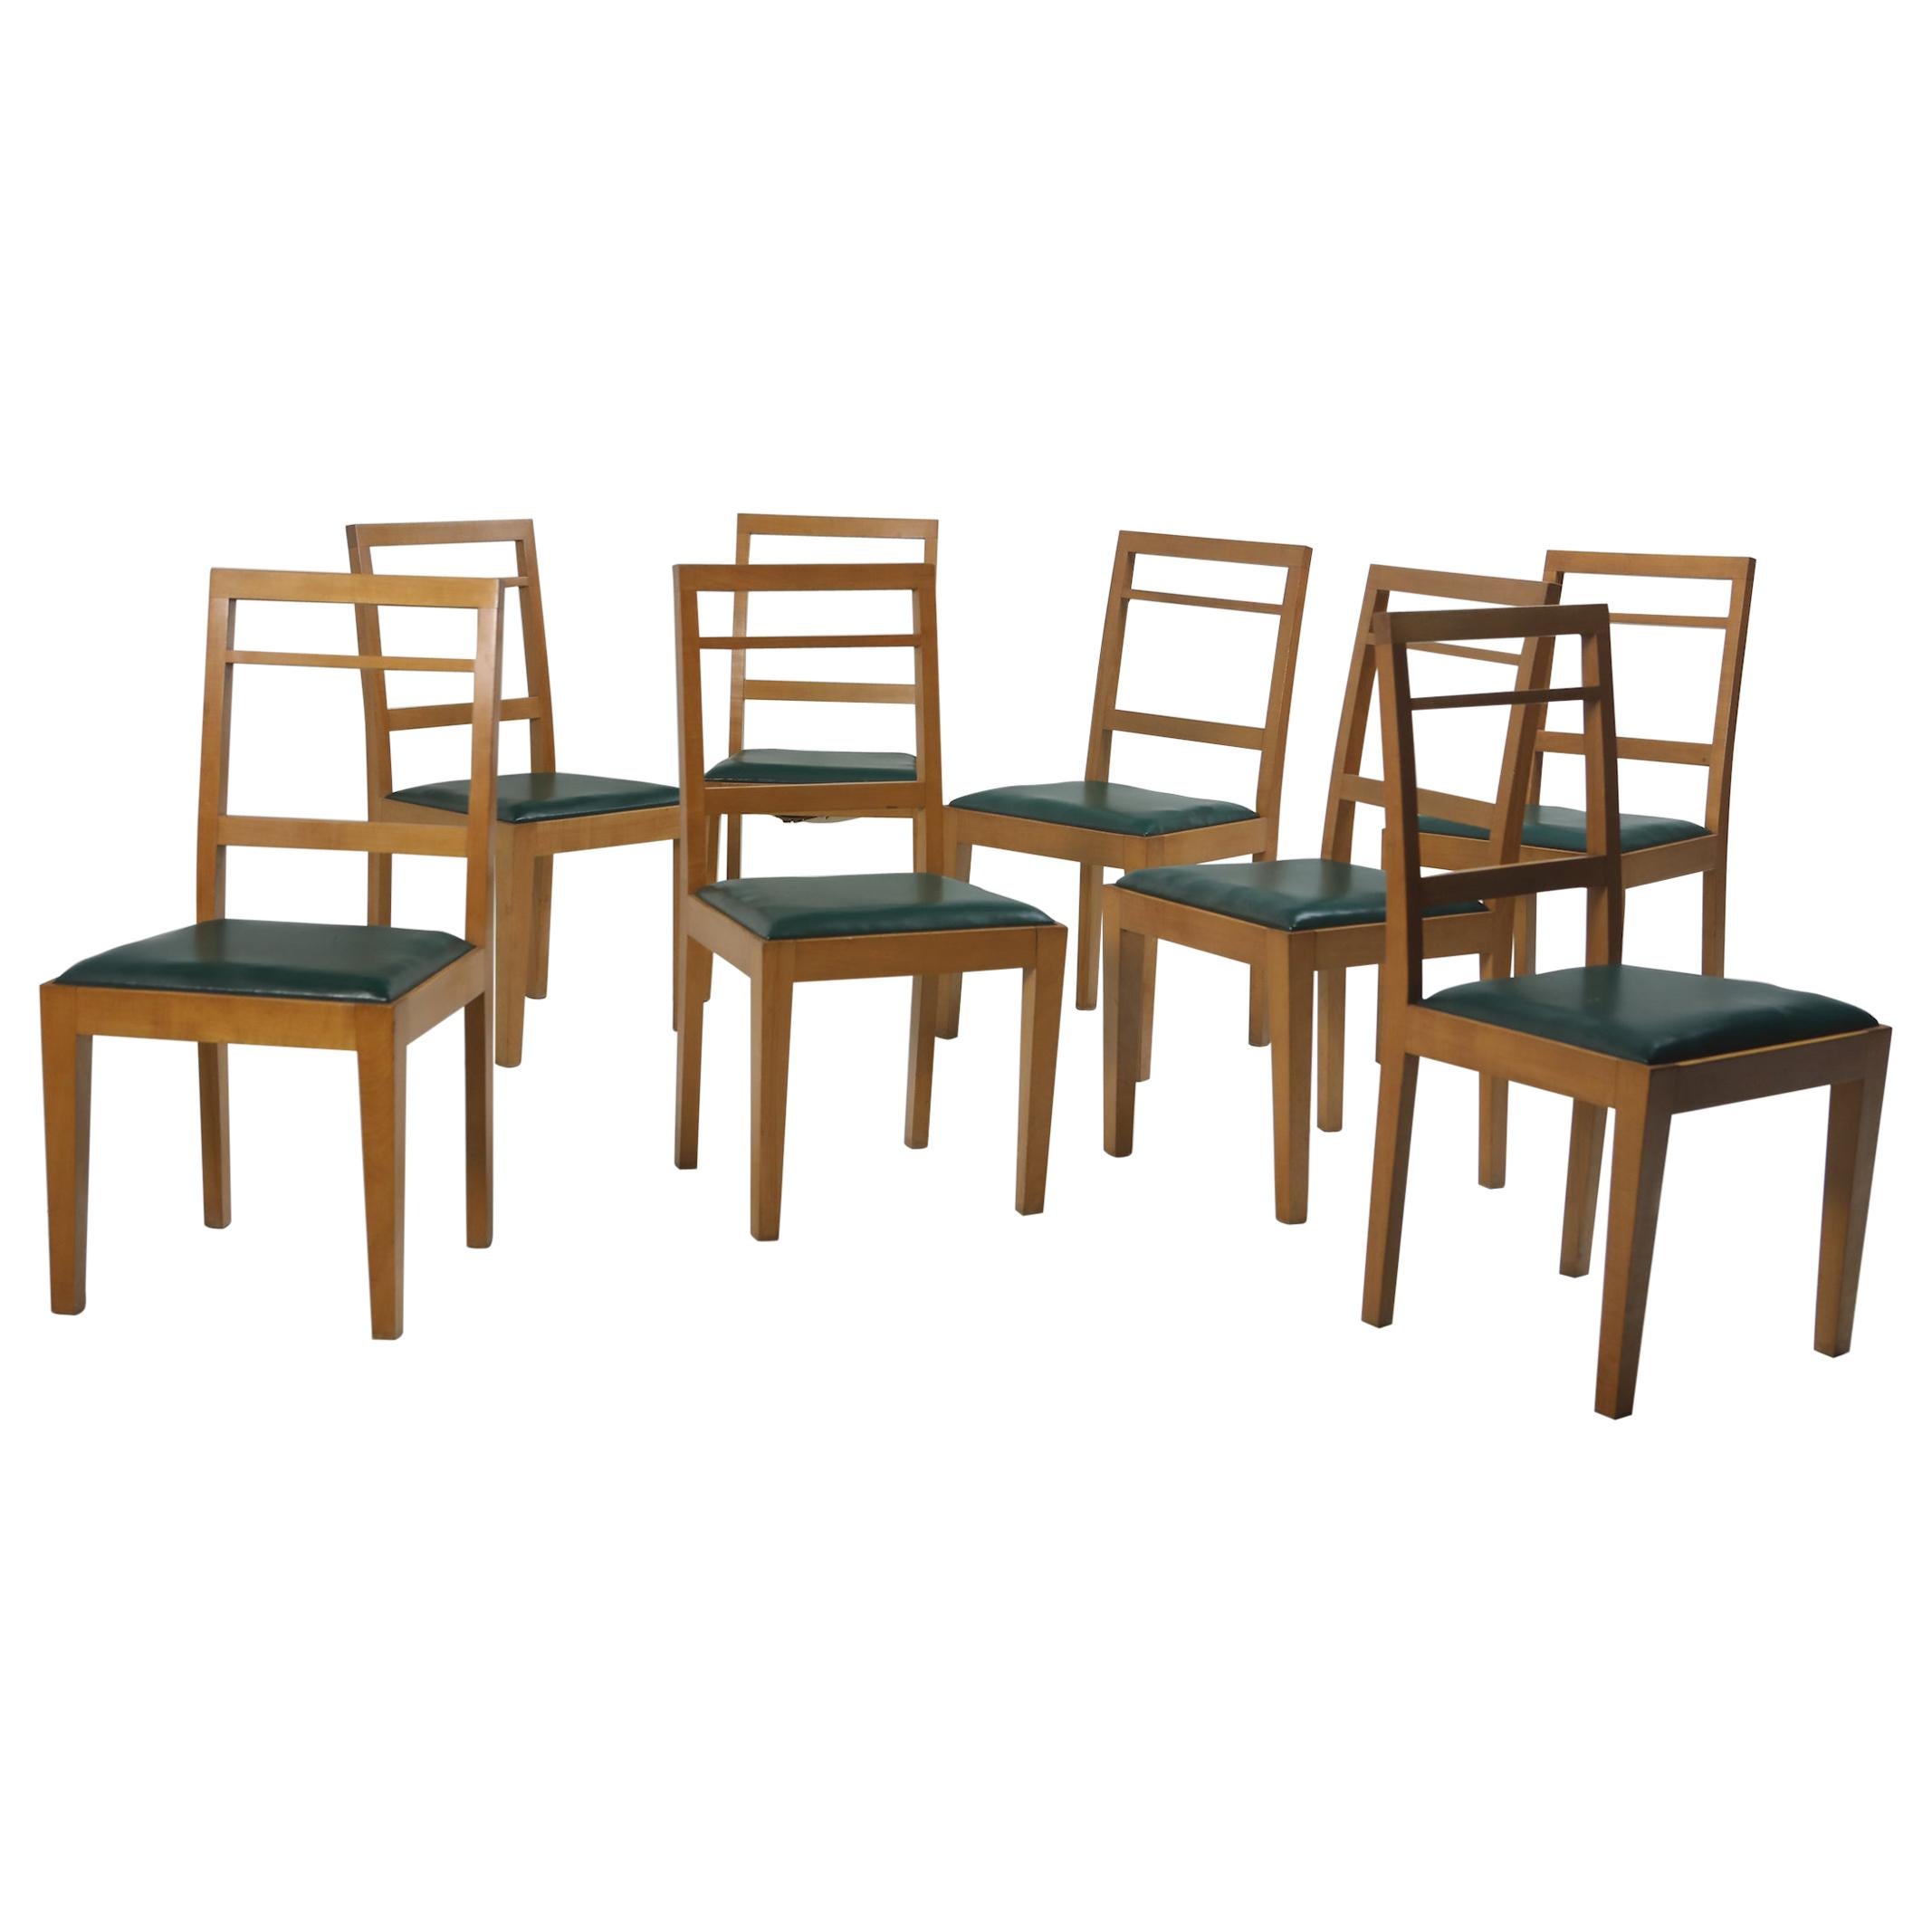 Mid-Century Modern Set of 8 Chairs in Wood and Leather, Brazil 1960s